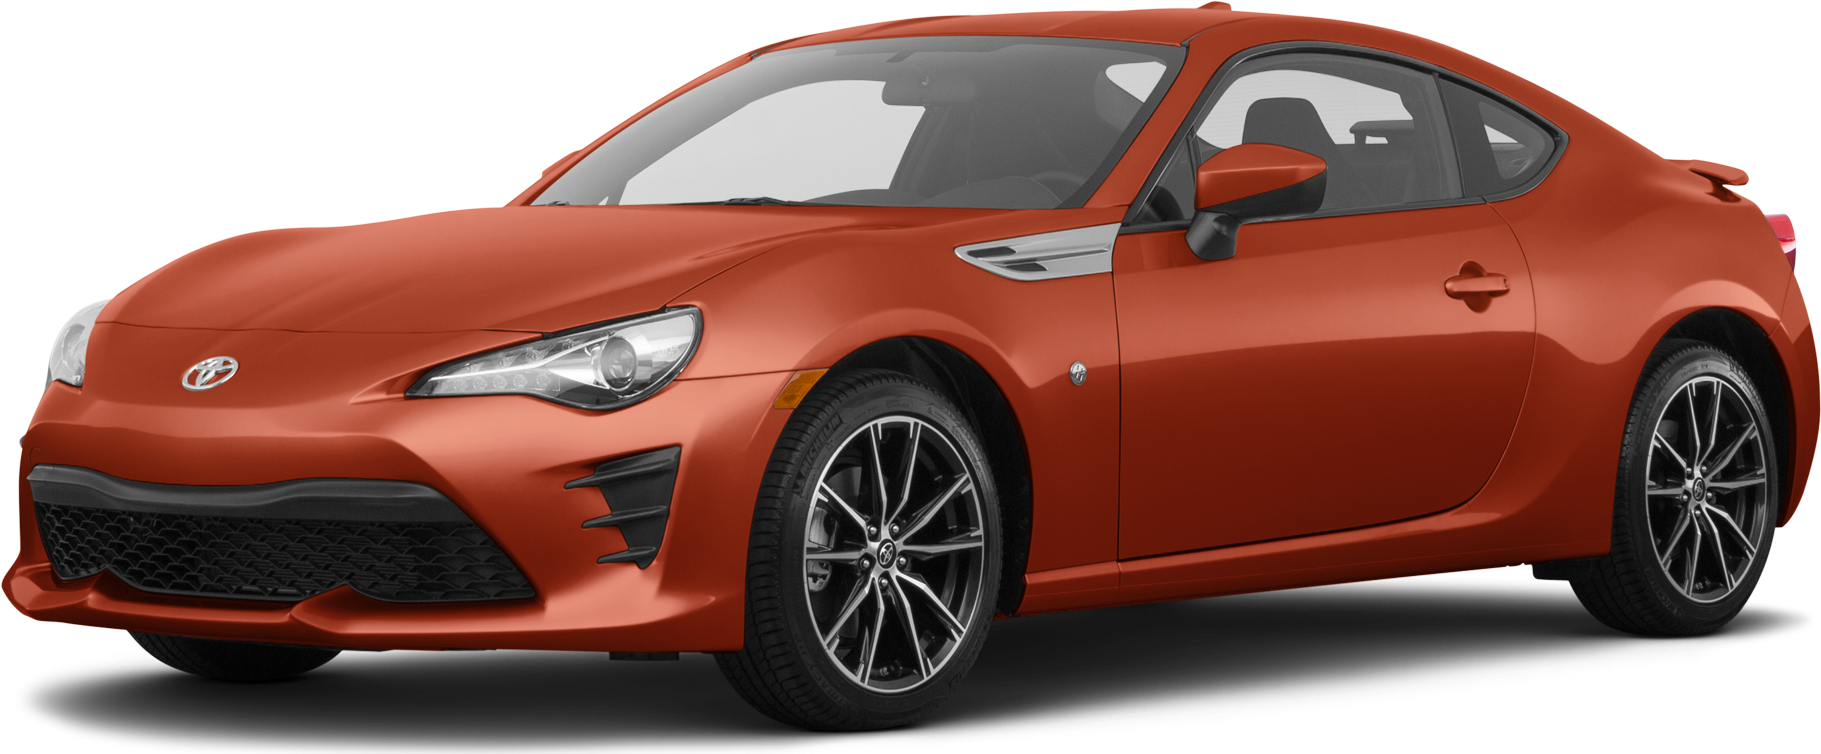 17 Toyota 86 Values Cars For Sale Kelley Blue Book